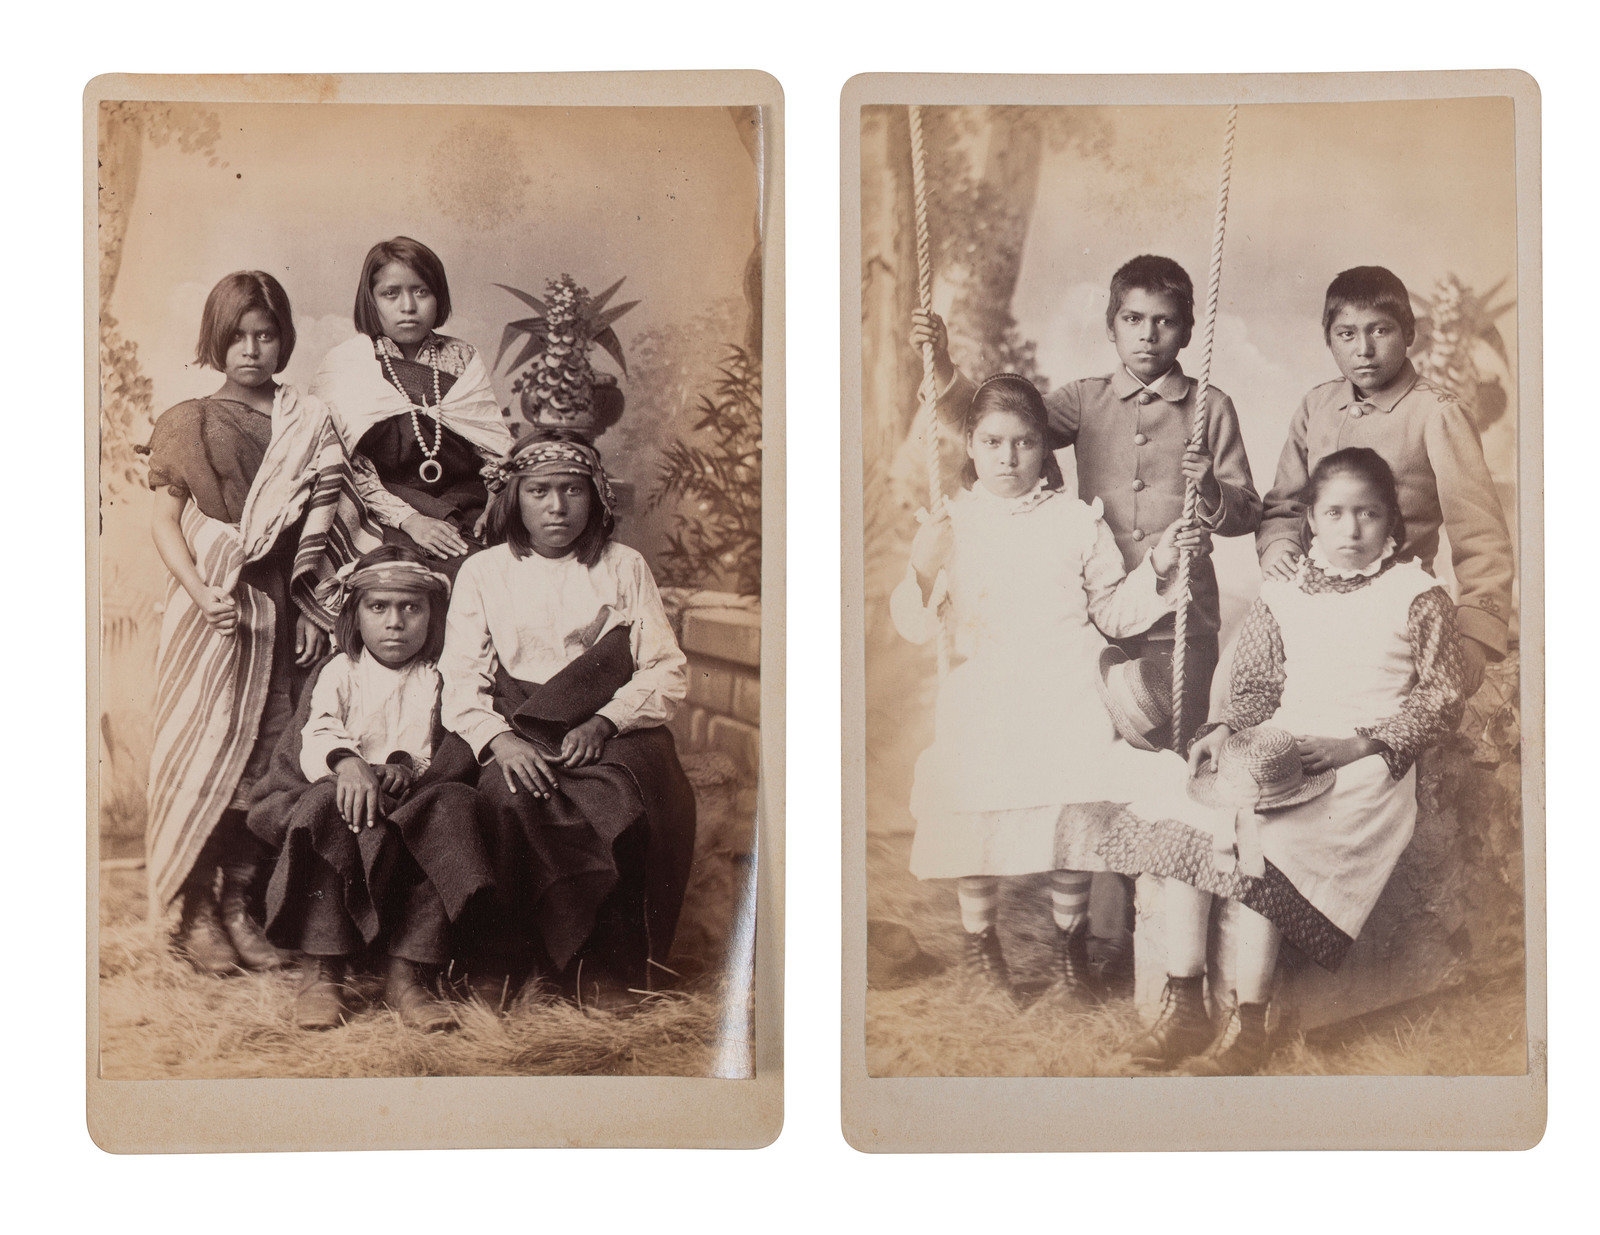 A pair of cabinet cards featuring identified Pueblo students at Carlisle Indian School, before and after by John Nicholas Choate, circa 1880